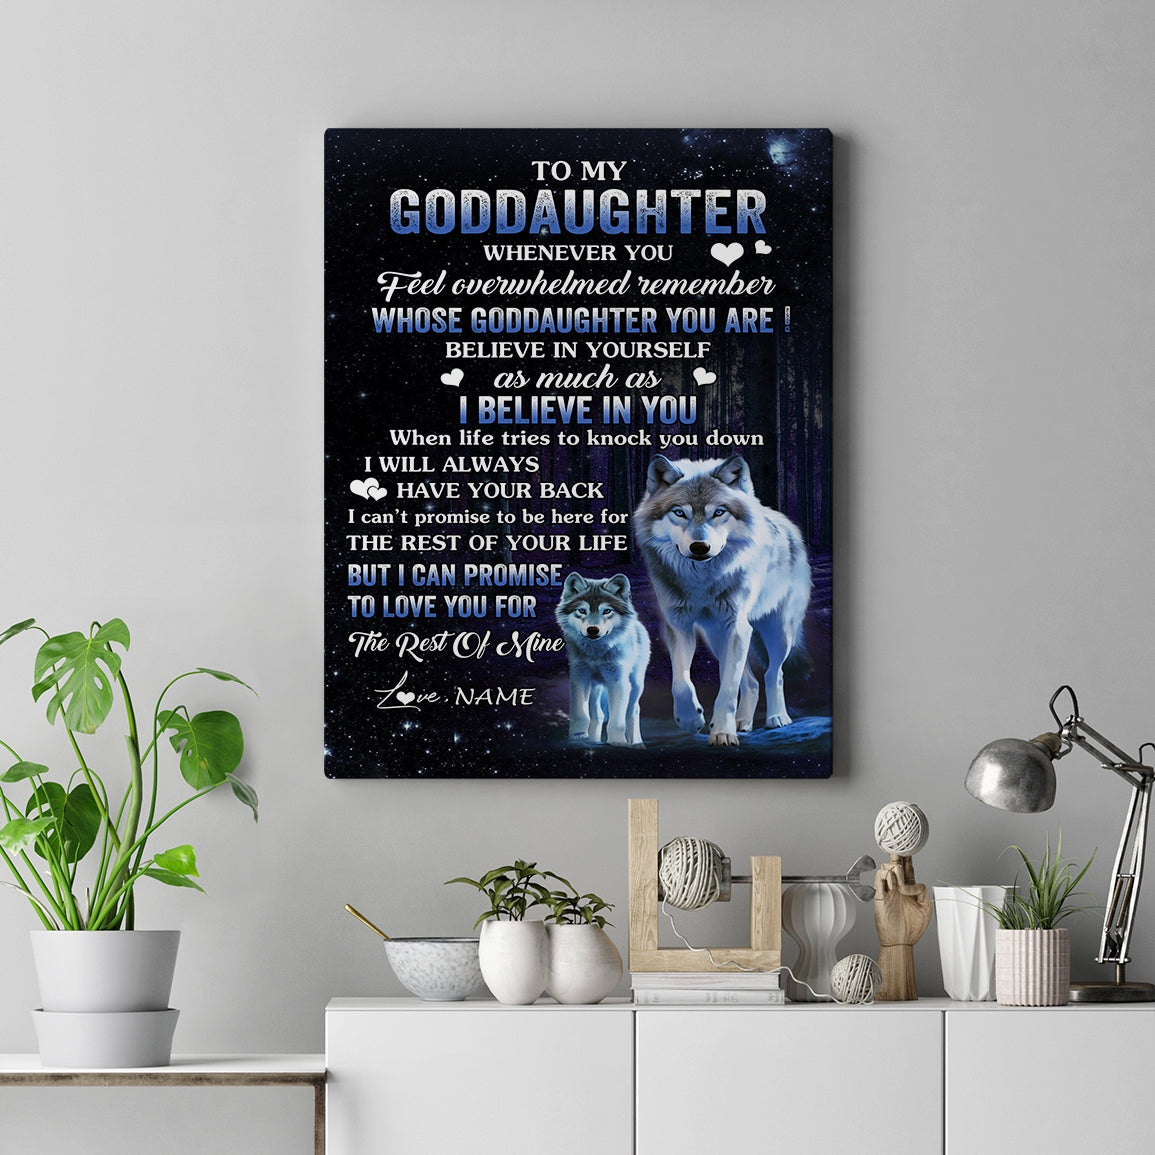 Personalized_To_My_Goddaughter_Canvas_From_Godfather_Aunt_Whenever_You_Feel_Wolf_Goddaughter_Birthday_Gifts_Graduation_Christmas_Custom_Wall_Art_Print_Framed_Canvas_Canvas_mockup_1.jpg